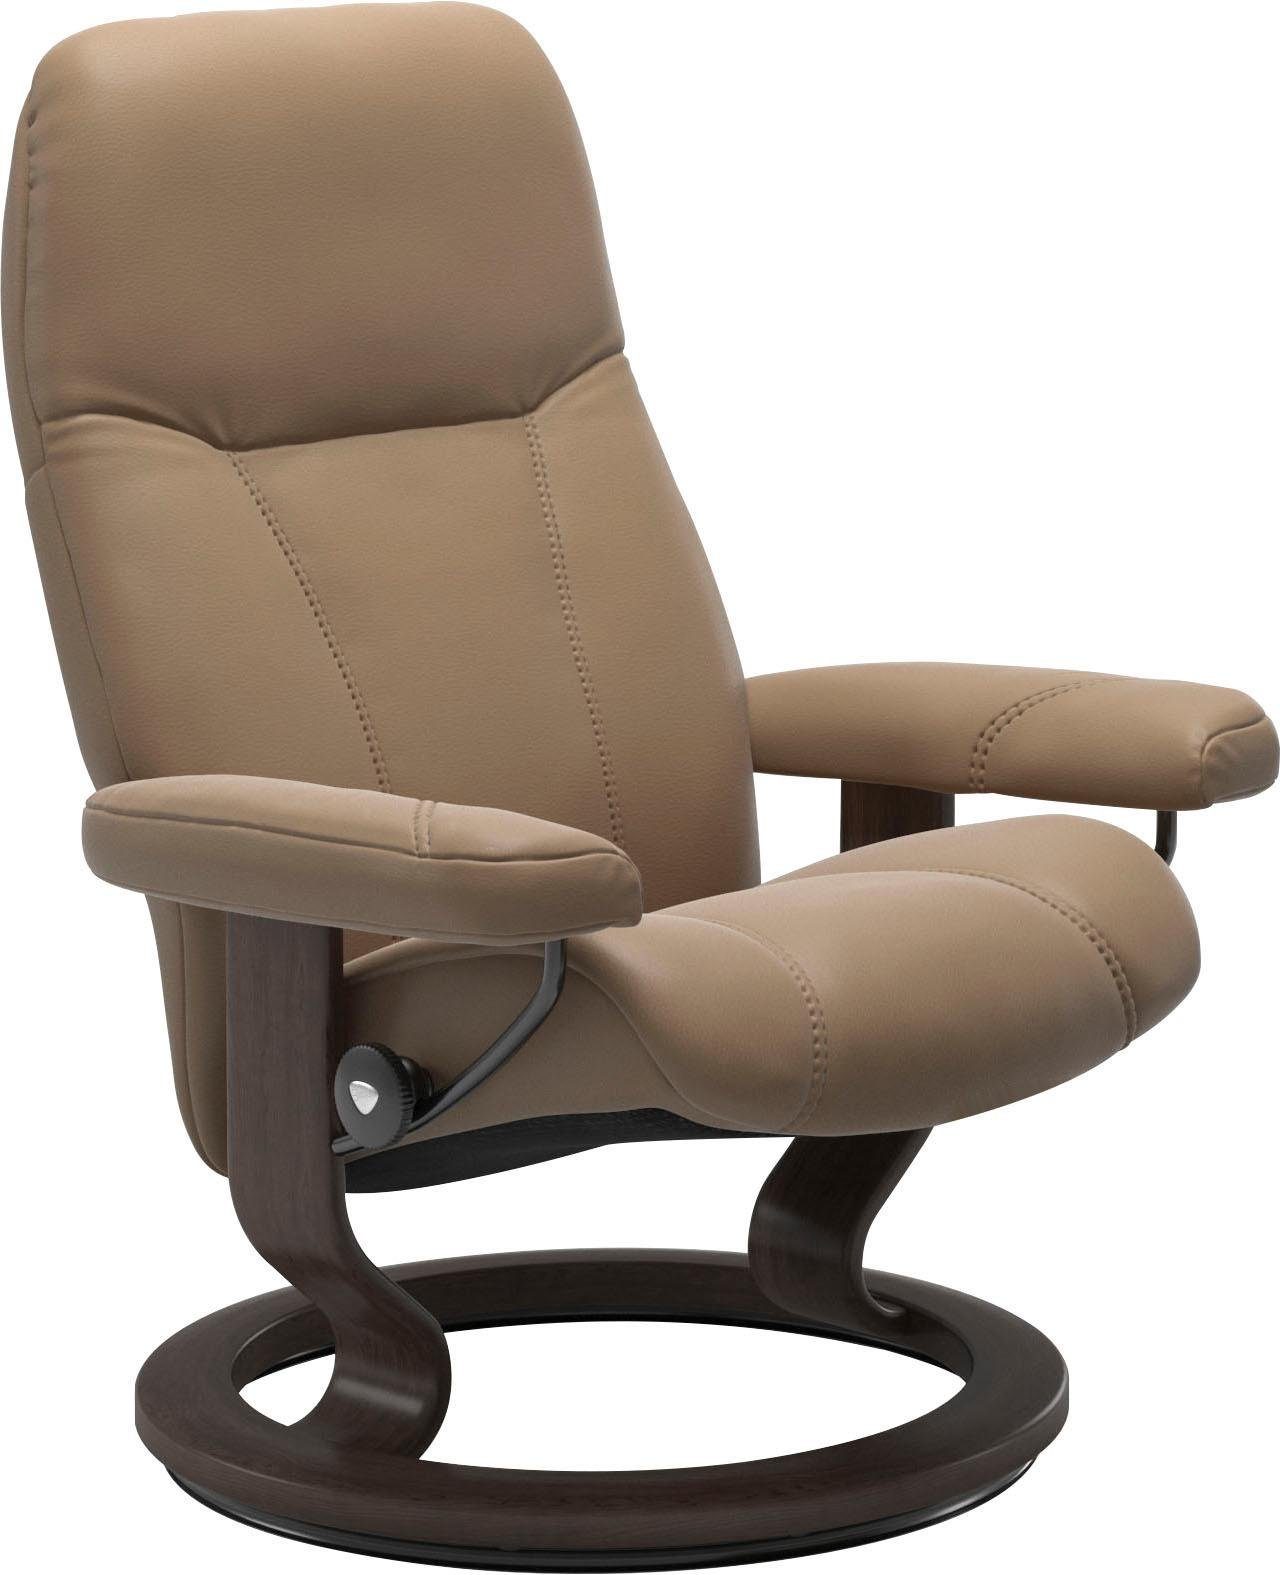 Consul, Classic mit Stressless® Gestell Relaxsessel Base, Größe M, Wenge